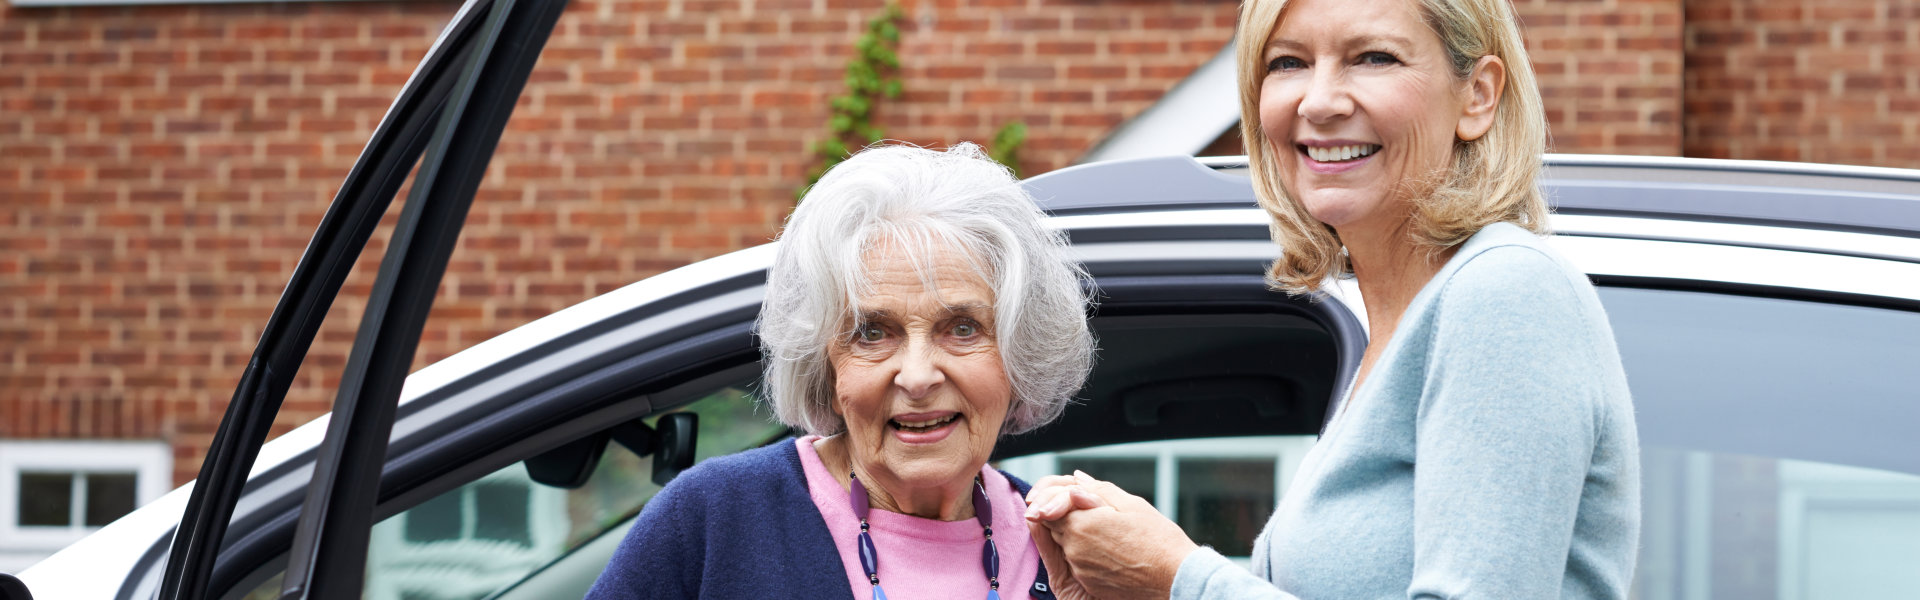 Female Neighbor Gives Senior Woman A Lift In Car